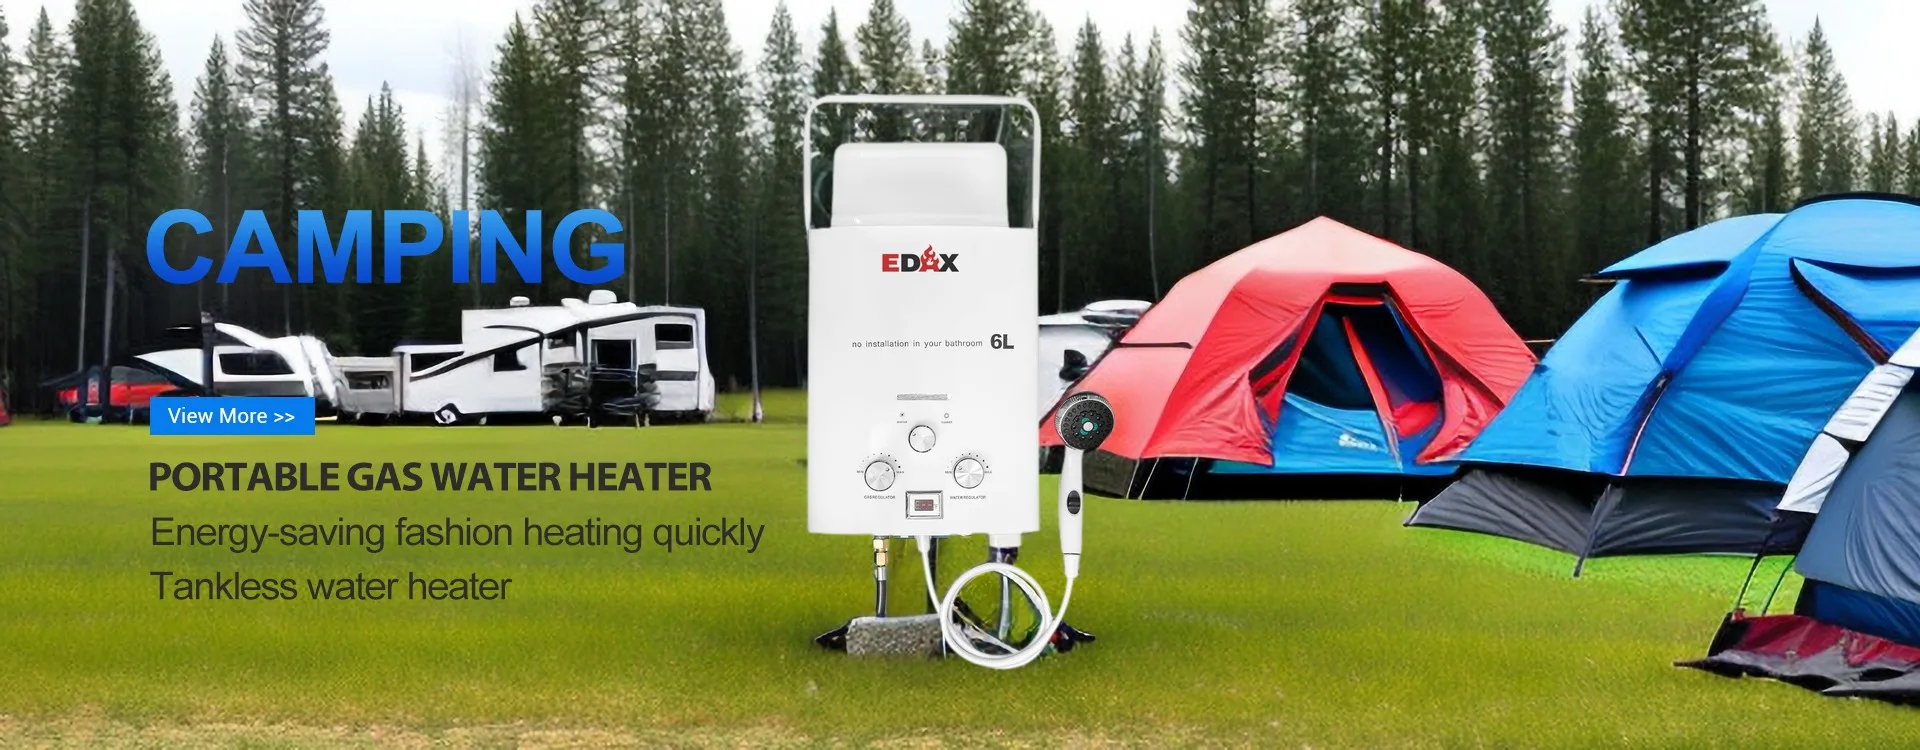 Portable camping gas water heater